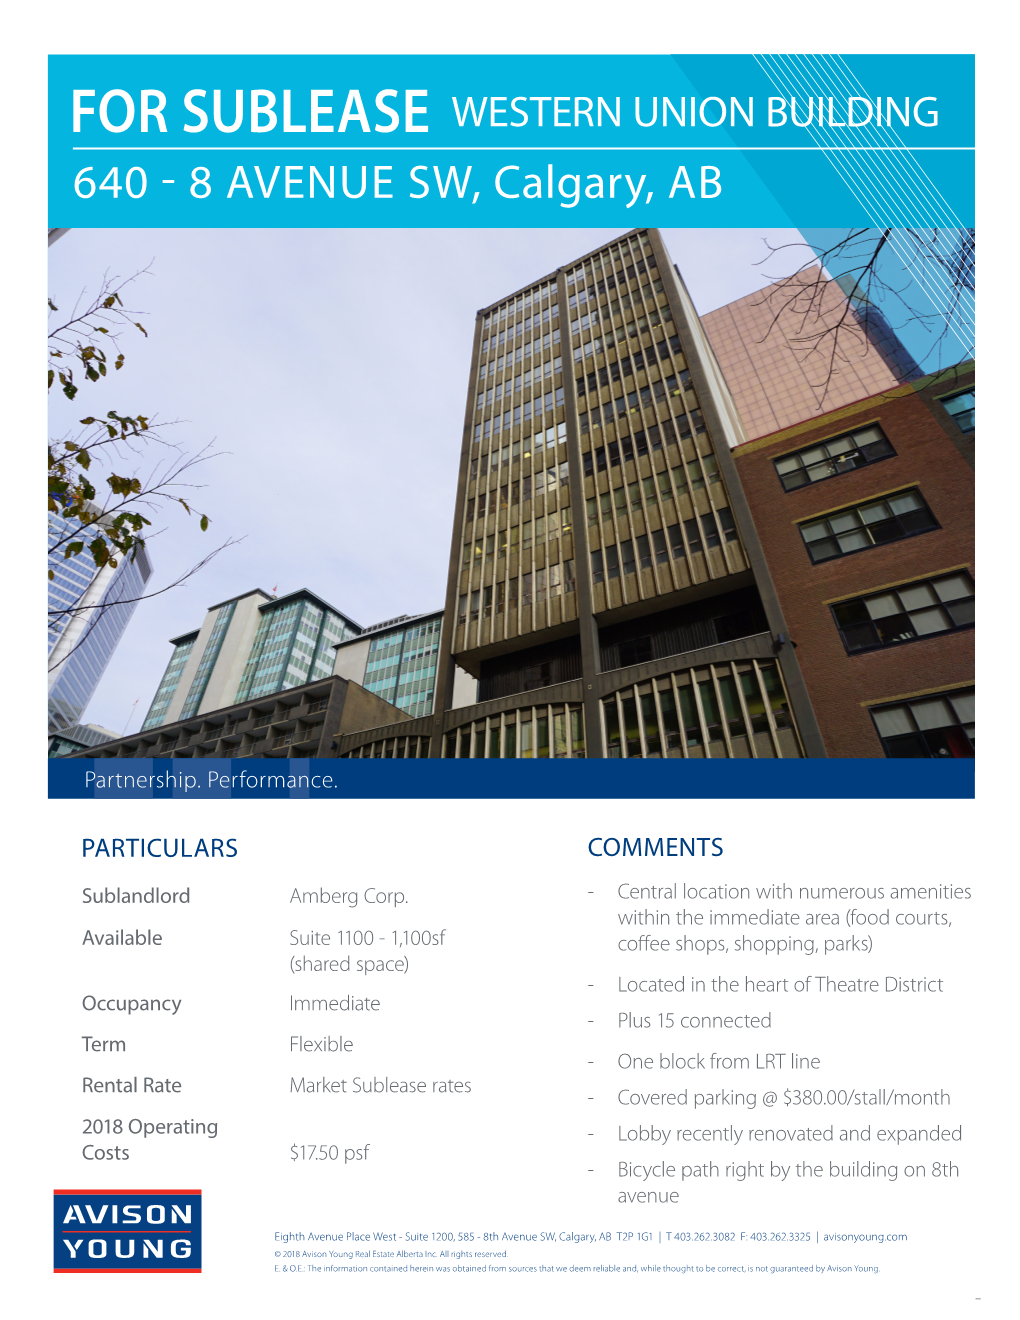 FOR SUBLEASE WESTERN UNION BUILDING 640 - 8 AVENUE SW, Calgary, AB